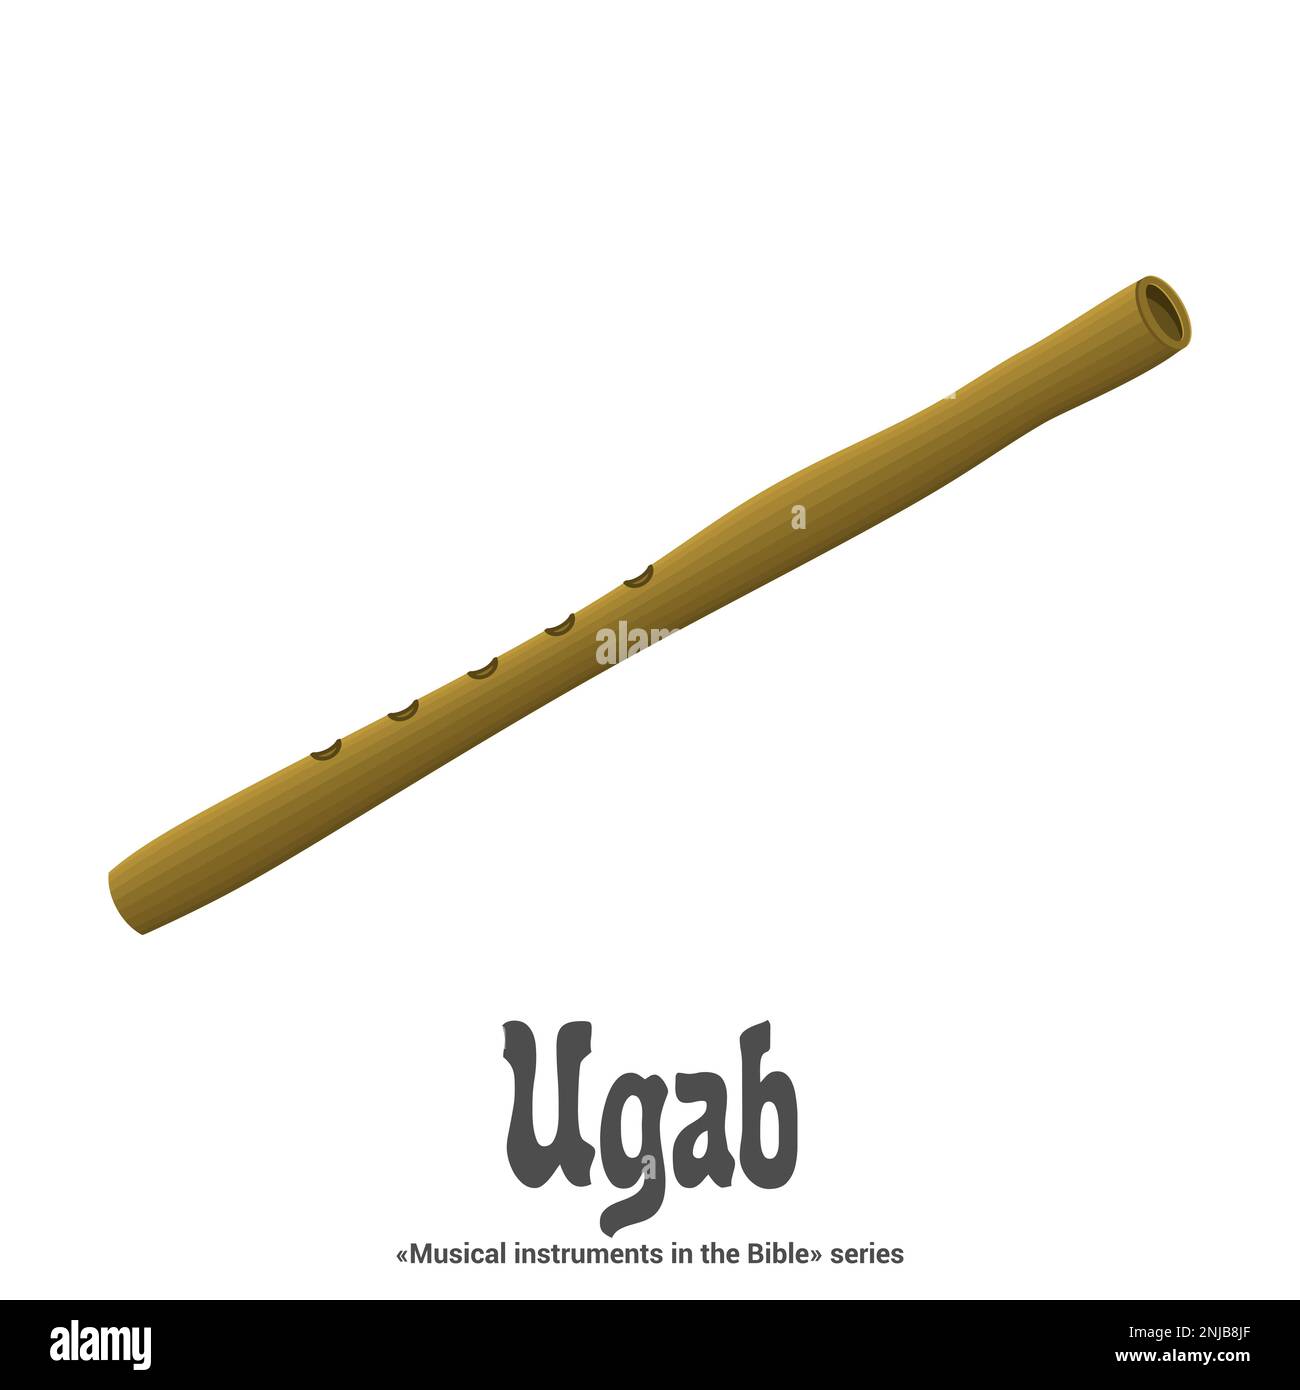 Musical Instruments in the Bible Series. UGAB is a whistle or the simplest form of flute. Stock Vector